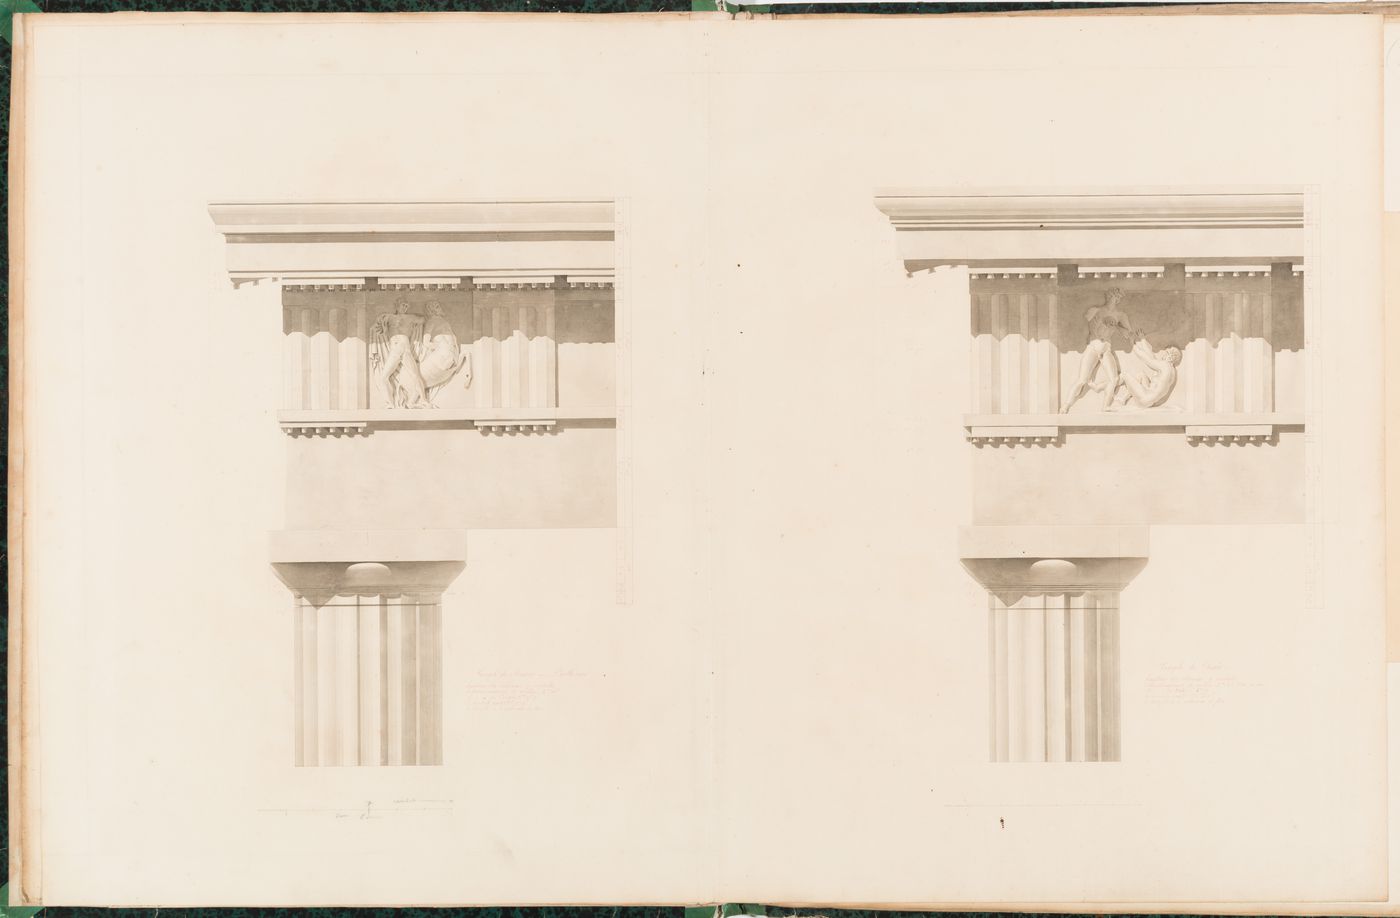 Elevations of columns and entablatures from two Greek Doric temples: the Parthenon, Rome and the Hephaisteion, Athens